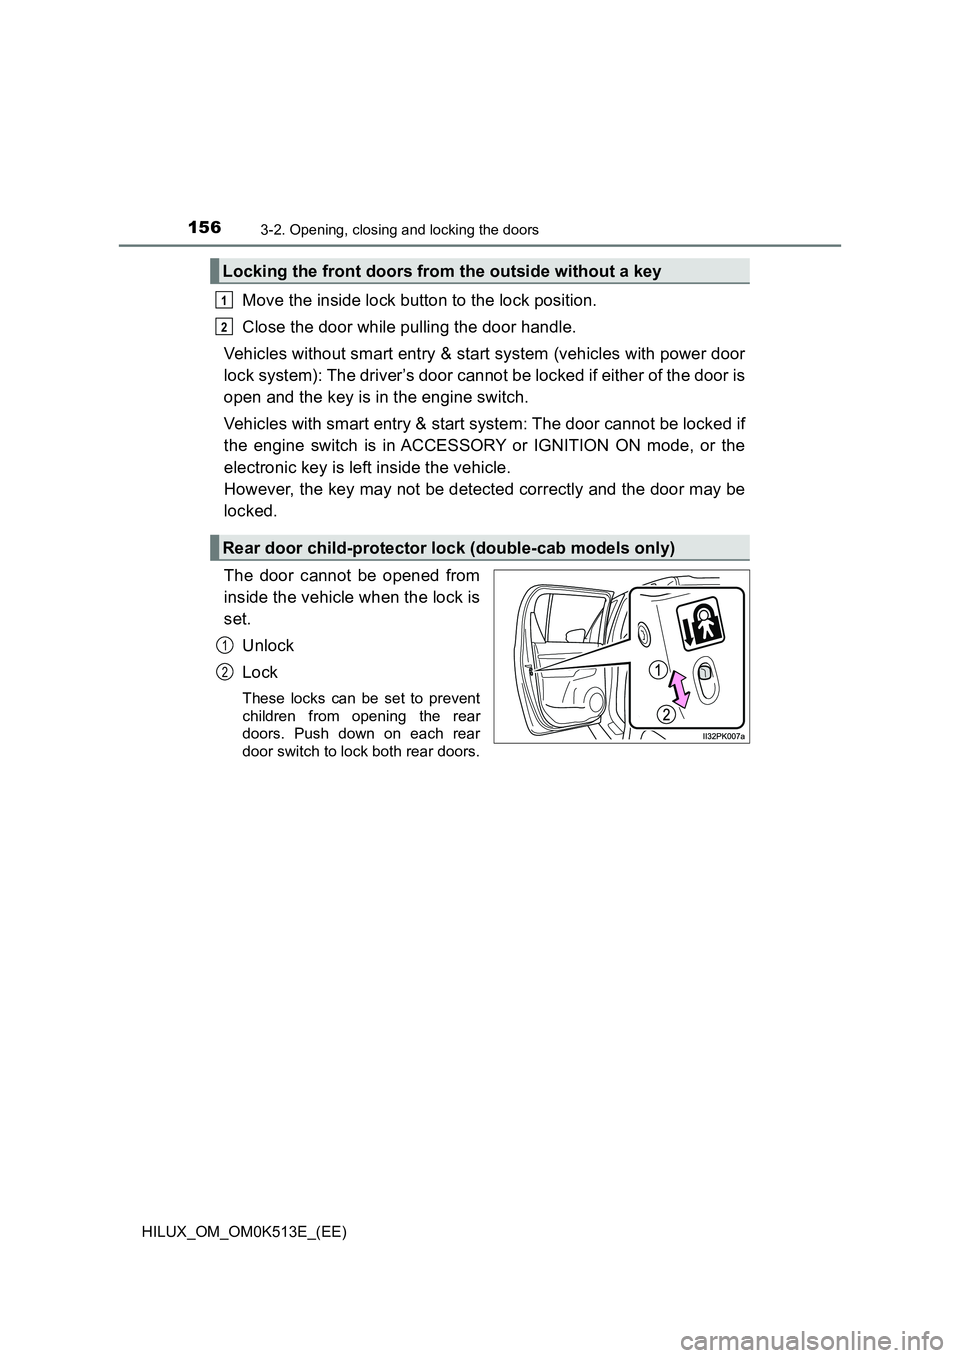 TOYOTA HILUX 2021  Owners Manual (in English) 1563-2. Opening, closing and locking the doors
HILUX_OM_OM0K513E_(EE)
Move the inside lock button to the lock position. 
Close the door while pulling the door handle. 
Vehicles without smart entry & s